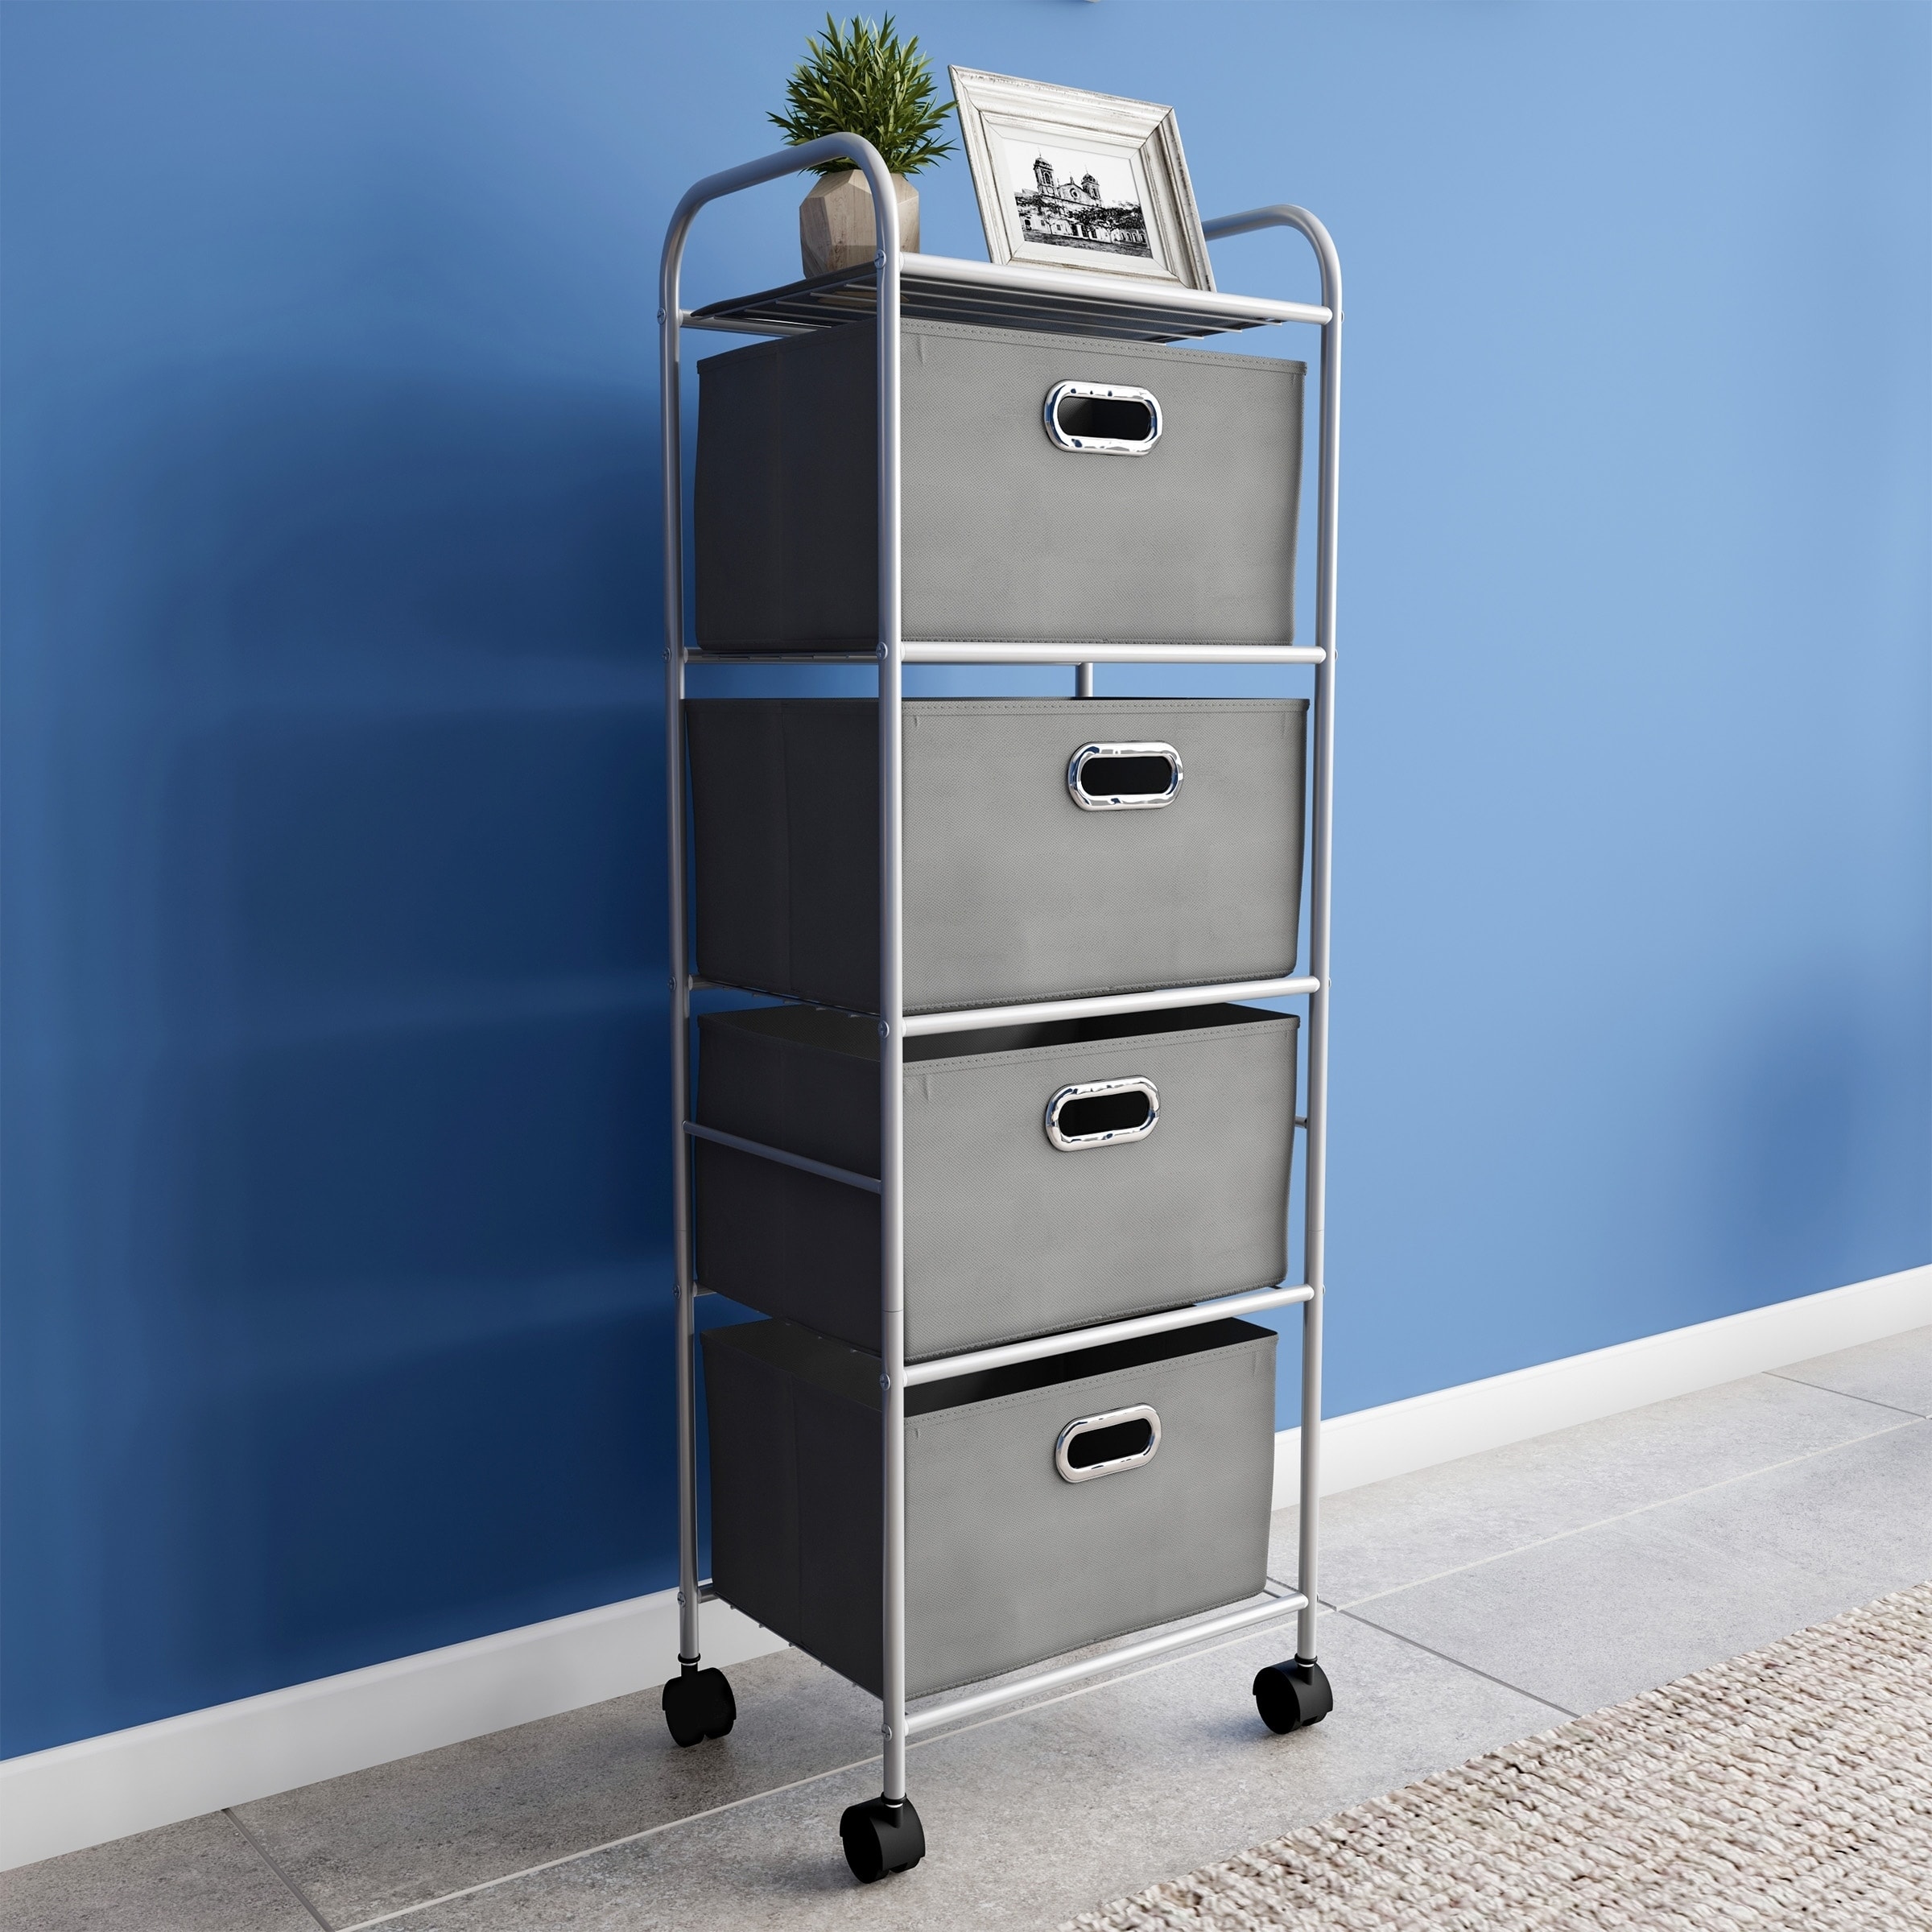 Rolling Storage Cart on Wheels- Portable Metal Storage Organizer with  Drawers and Fabric Bins by Lavish Home On Sale Bed Bath  Beyond  28002685